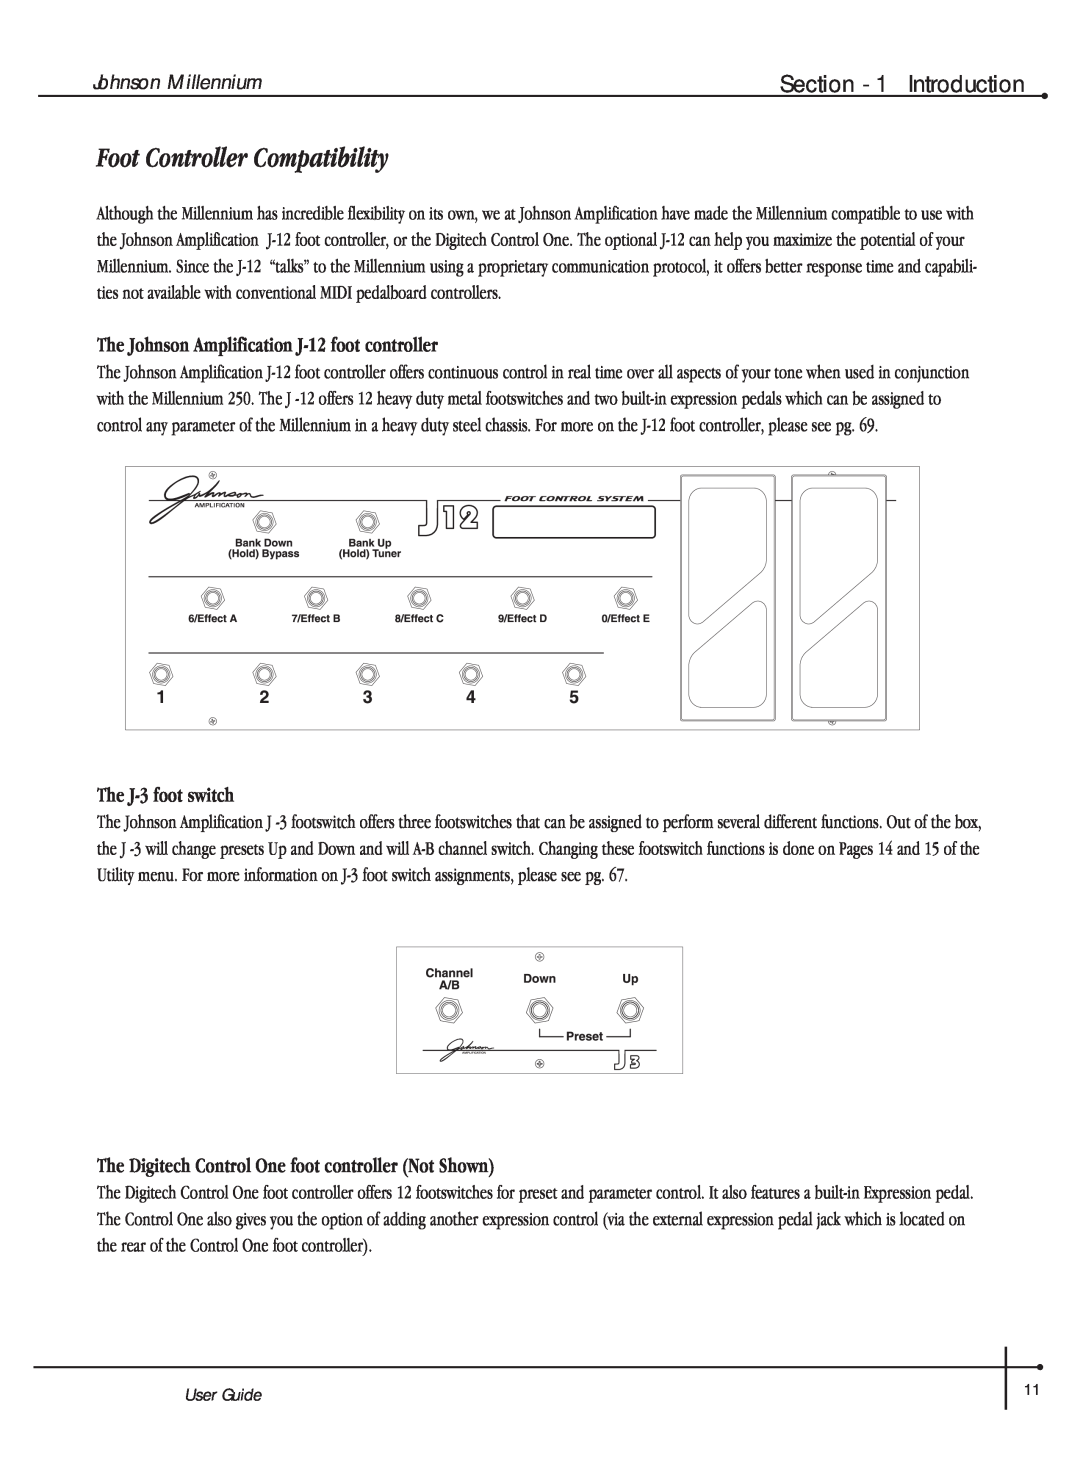 Millennium Enterprises Integrated Modeling Amplifier manual Foot Controller Compatibility, Introduction, User Guide 